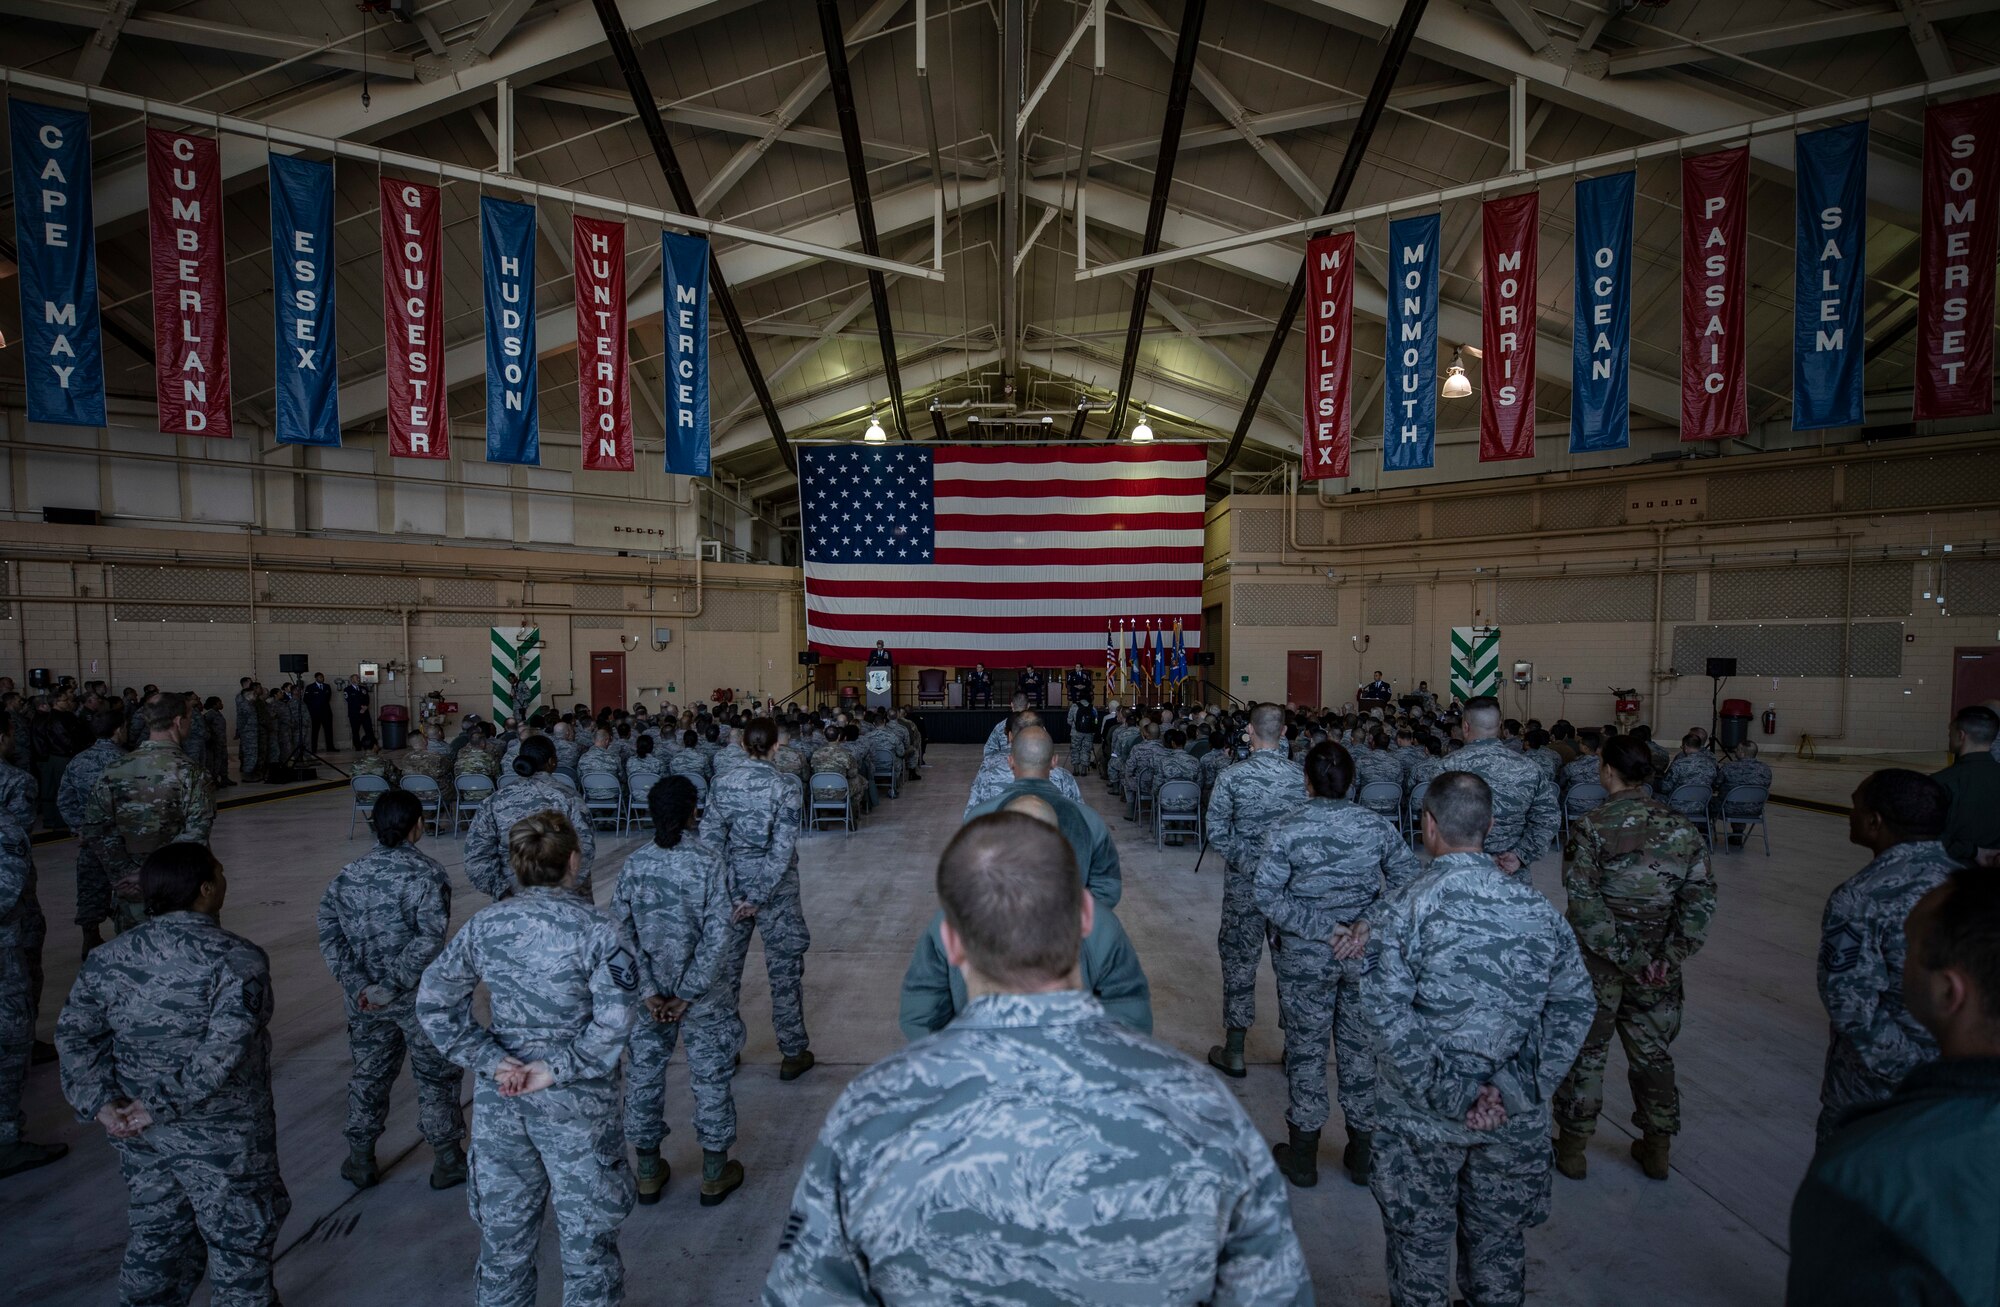 Brig. Gen. Kevin J. Keehn, commander of the New Jersey Air National Guard, speaks during the change of command ceremony for incoming 108th Wing Commander Col. John M. Cosgrove on Joint Base McGuire-Dix-Lakehurst, N.J., Nov. 4, 2018.